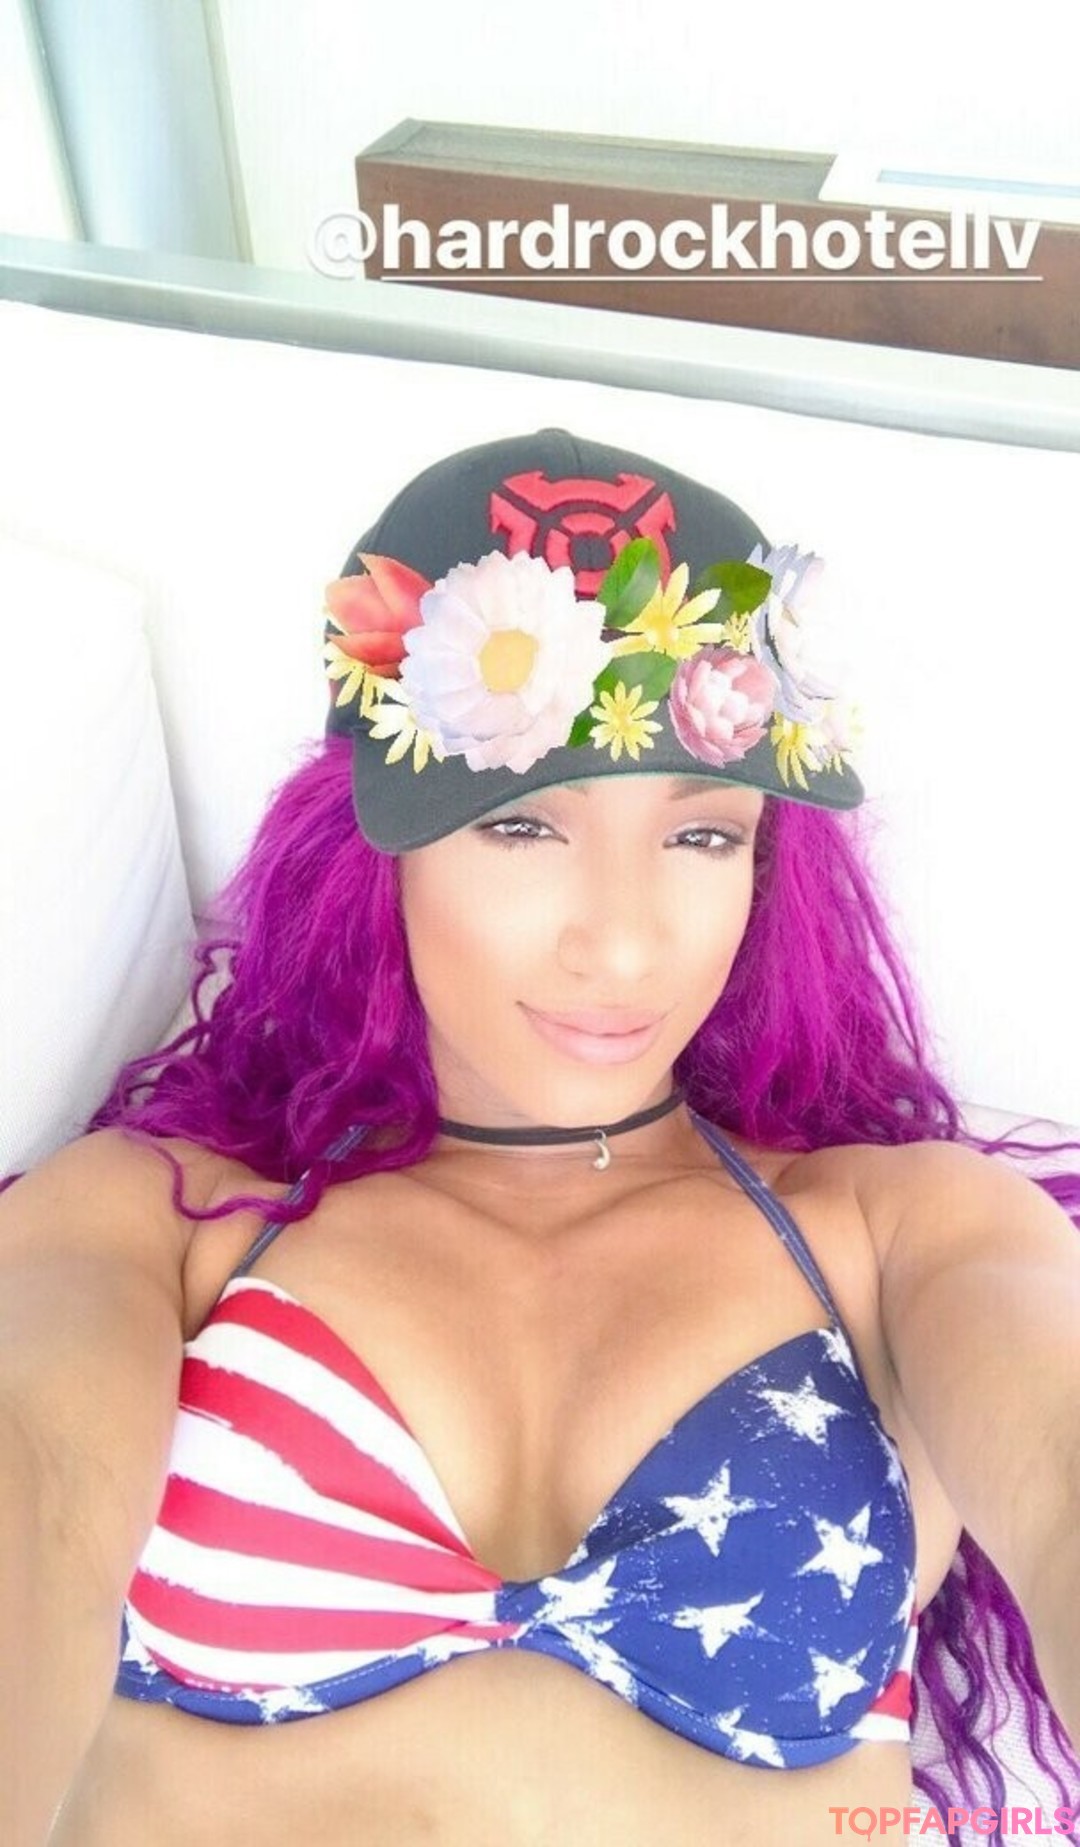 brenda johnson may recommends sasha banks leaked nude pic